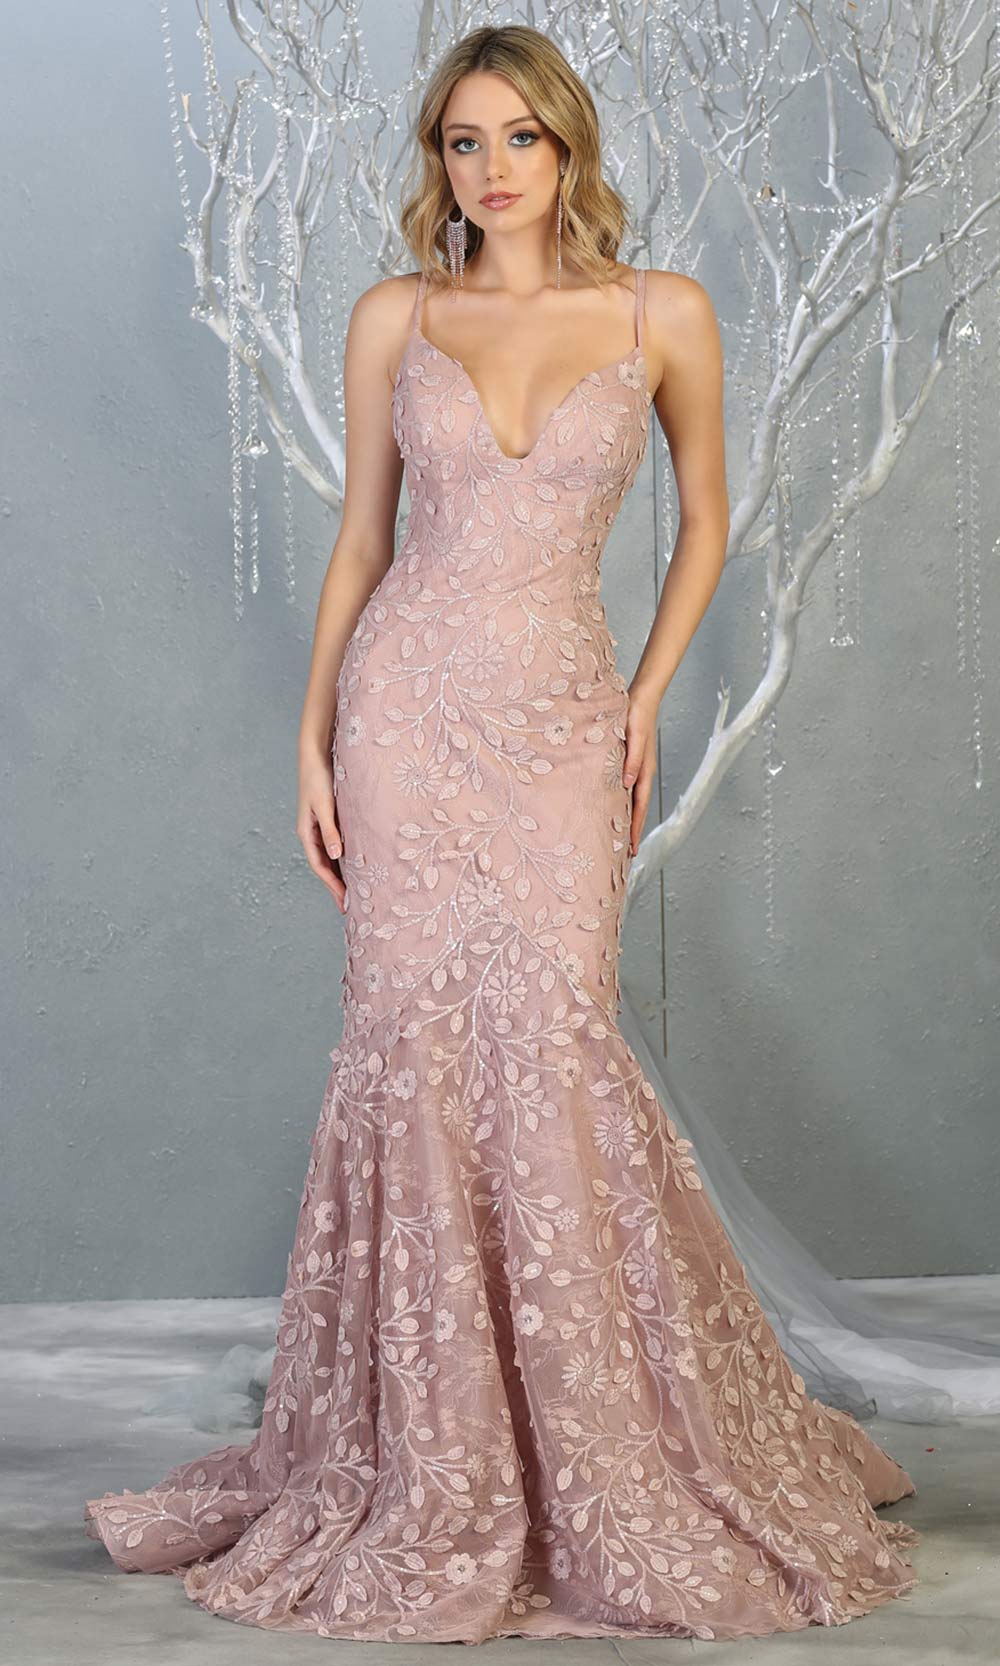 Mayqueen RQ7811 long mauve v neck sexy fitted lace mermaid dress w/open back. Full length dusty rose gown is perfect for  enagagement/e-shoot dress, formal wedding guest, indowestern gown, evening party dress, prom, bridesmaid. Plus sizes avail.jpg